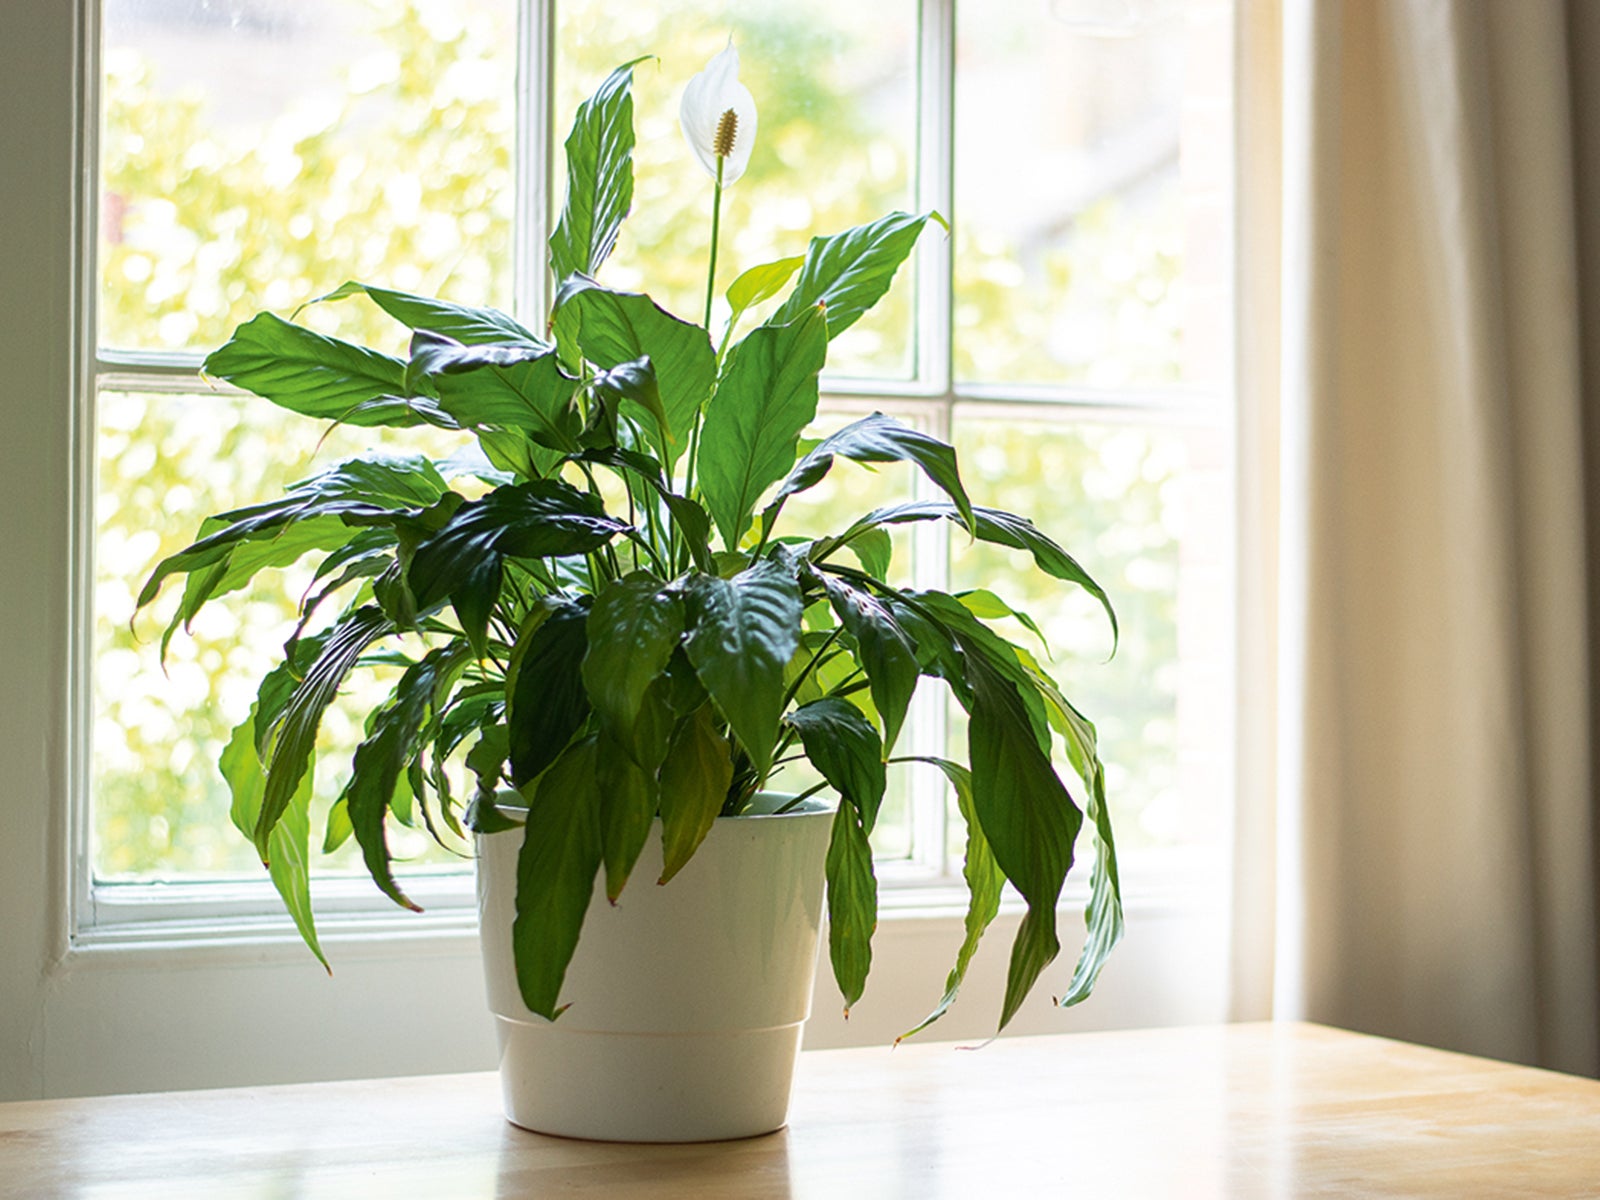 Peace lily house plant next to a window in a beautifully designed interior